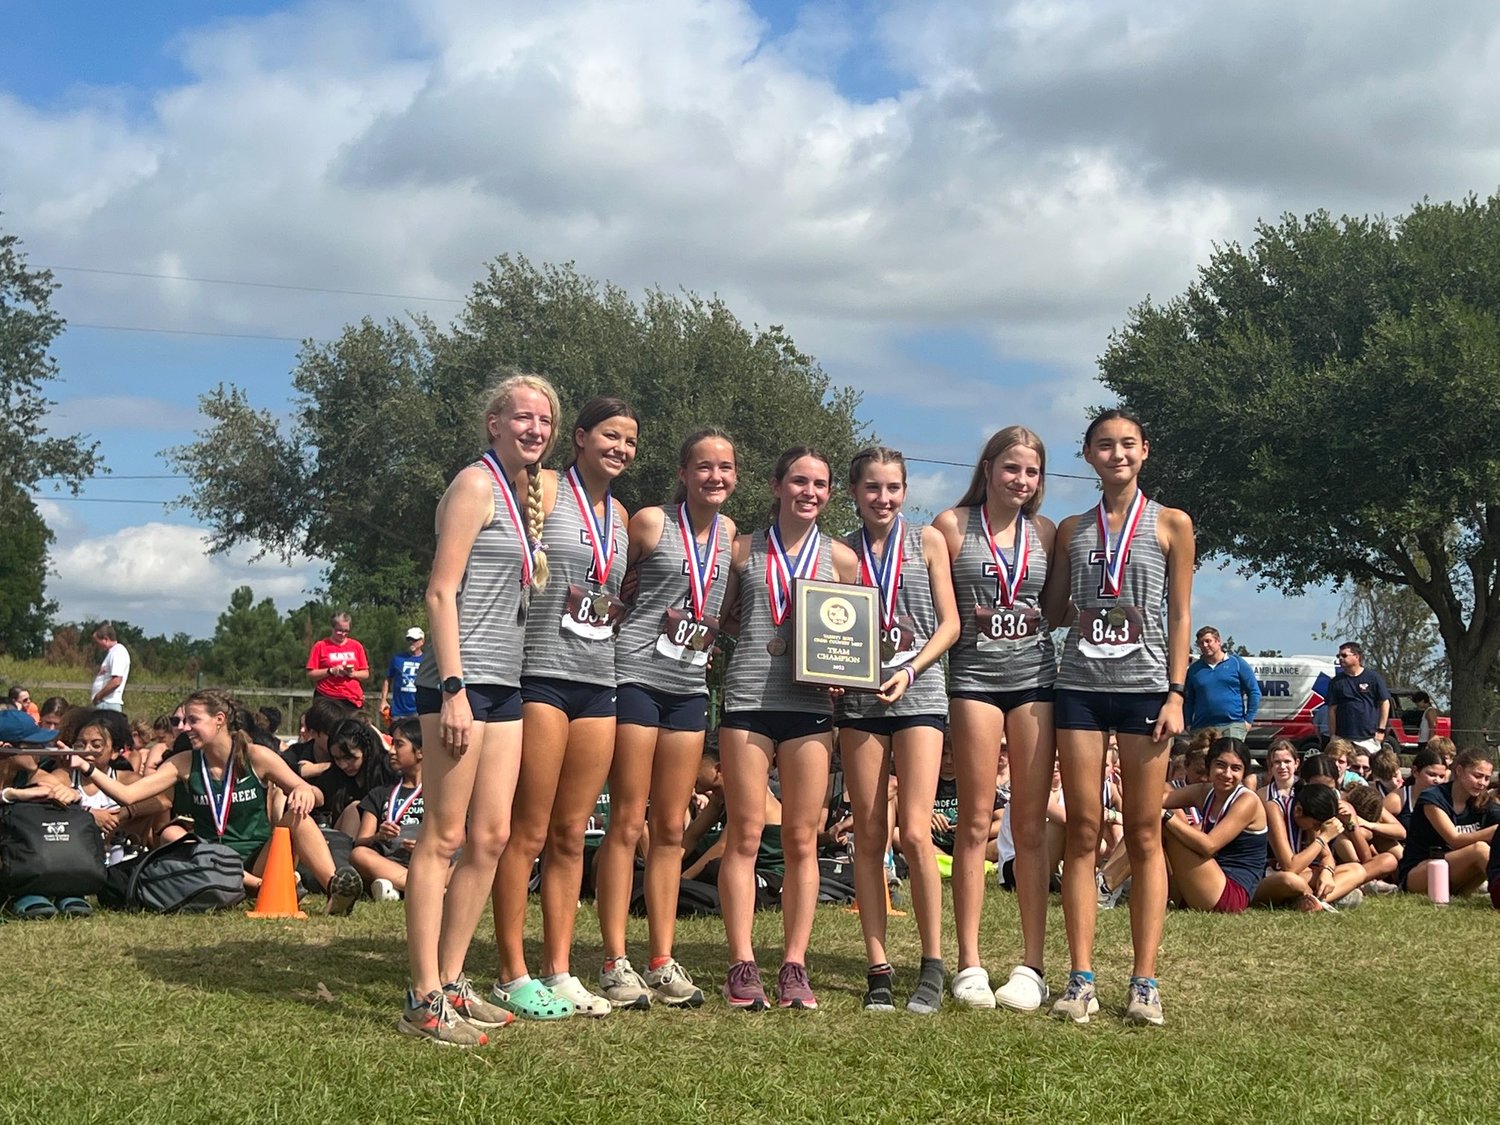 The Tompkins girls cross country team celebrates winning the District 19-6A cross country meet on Thursday morning at Paul D. Rushing Park.